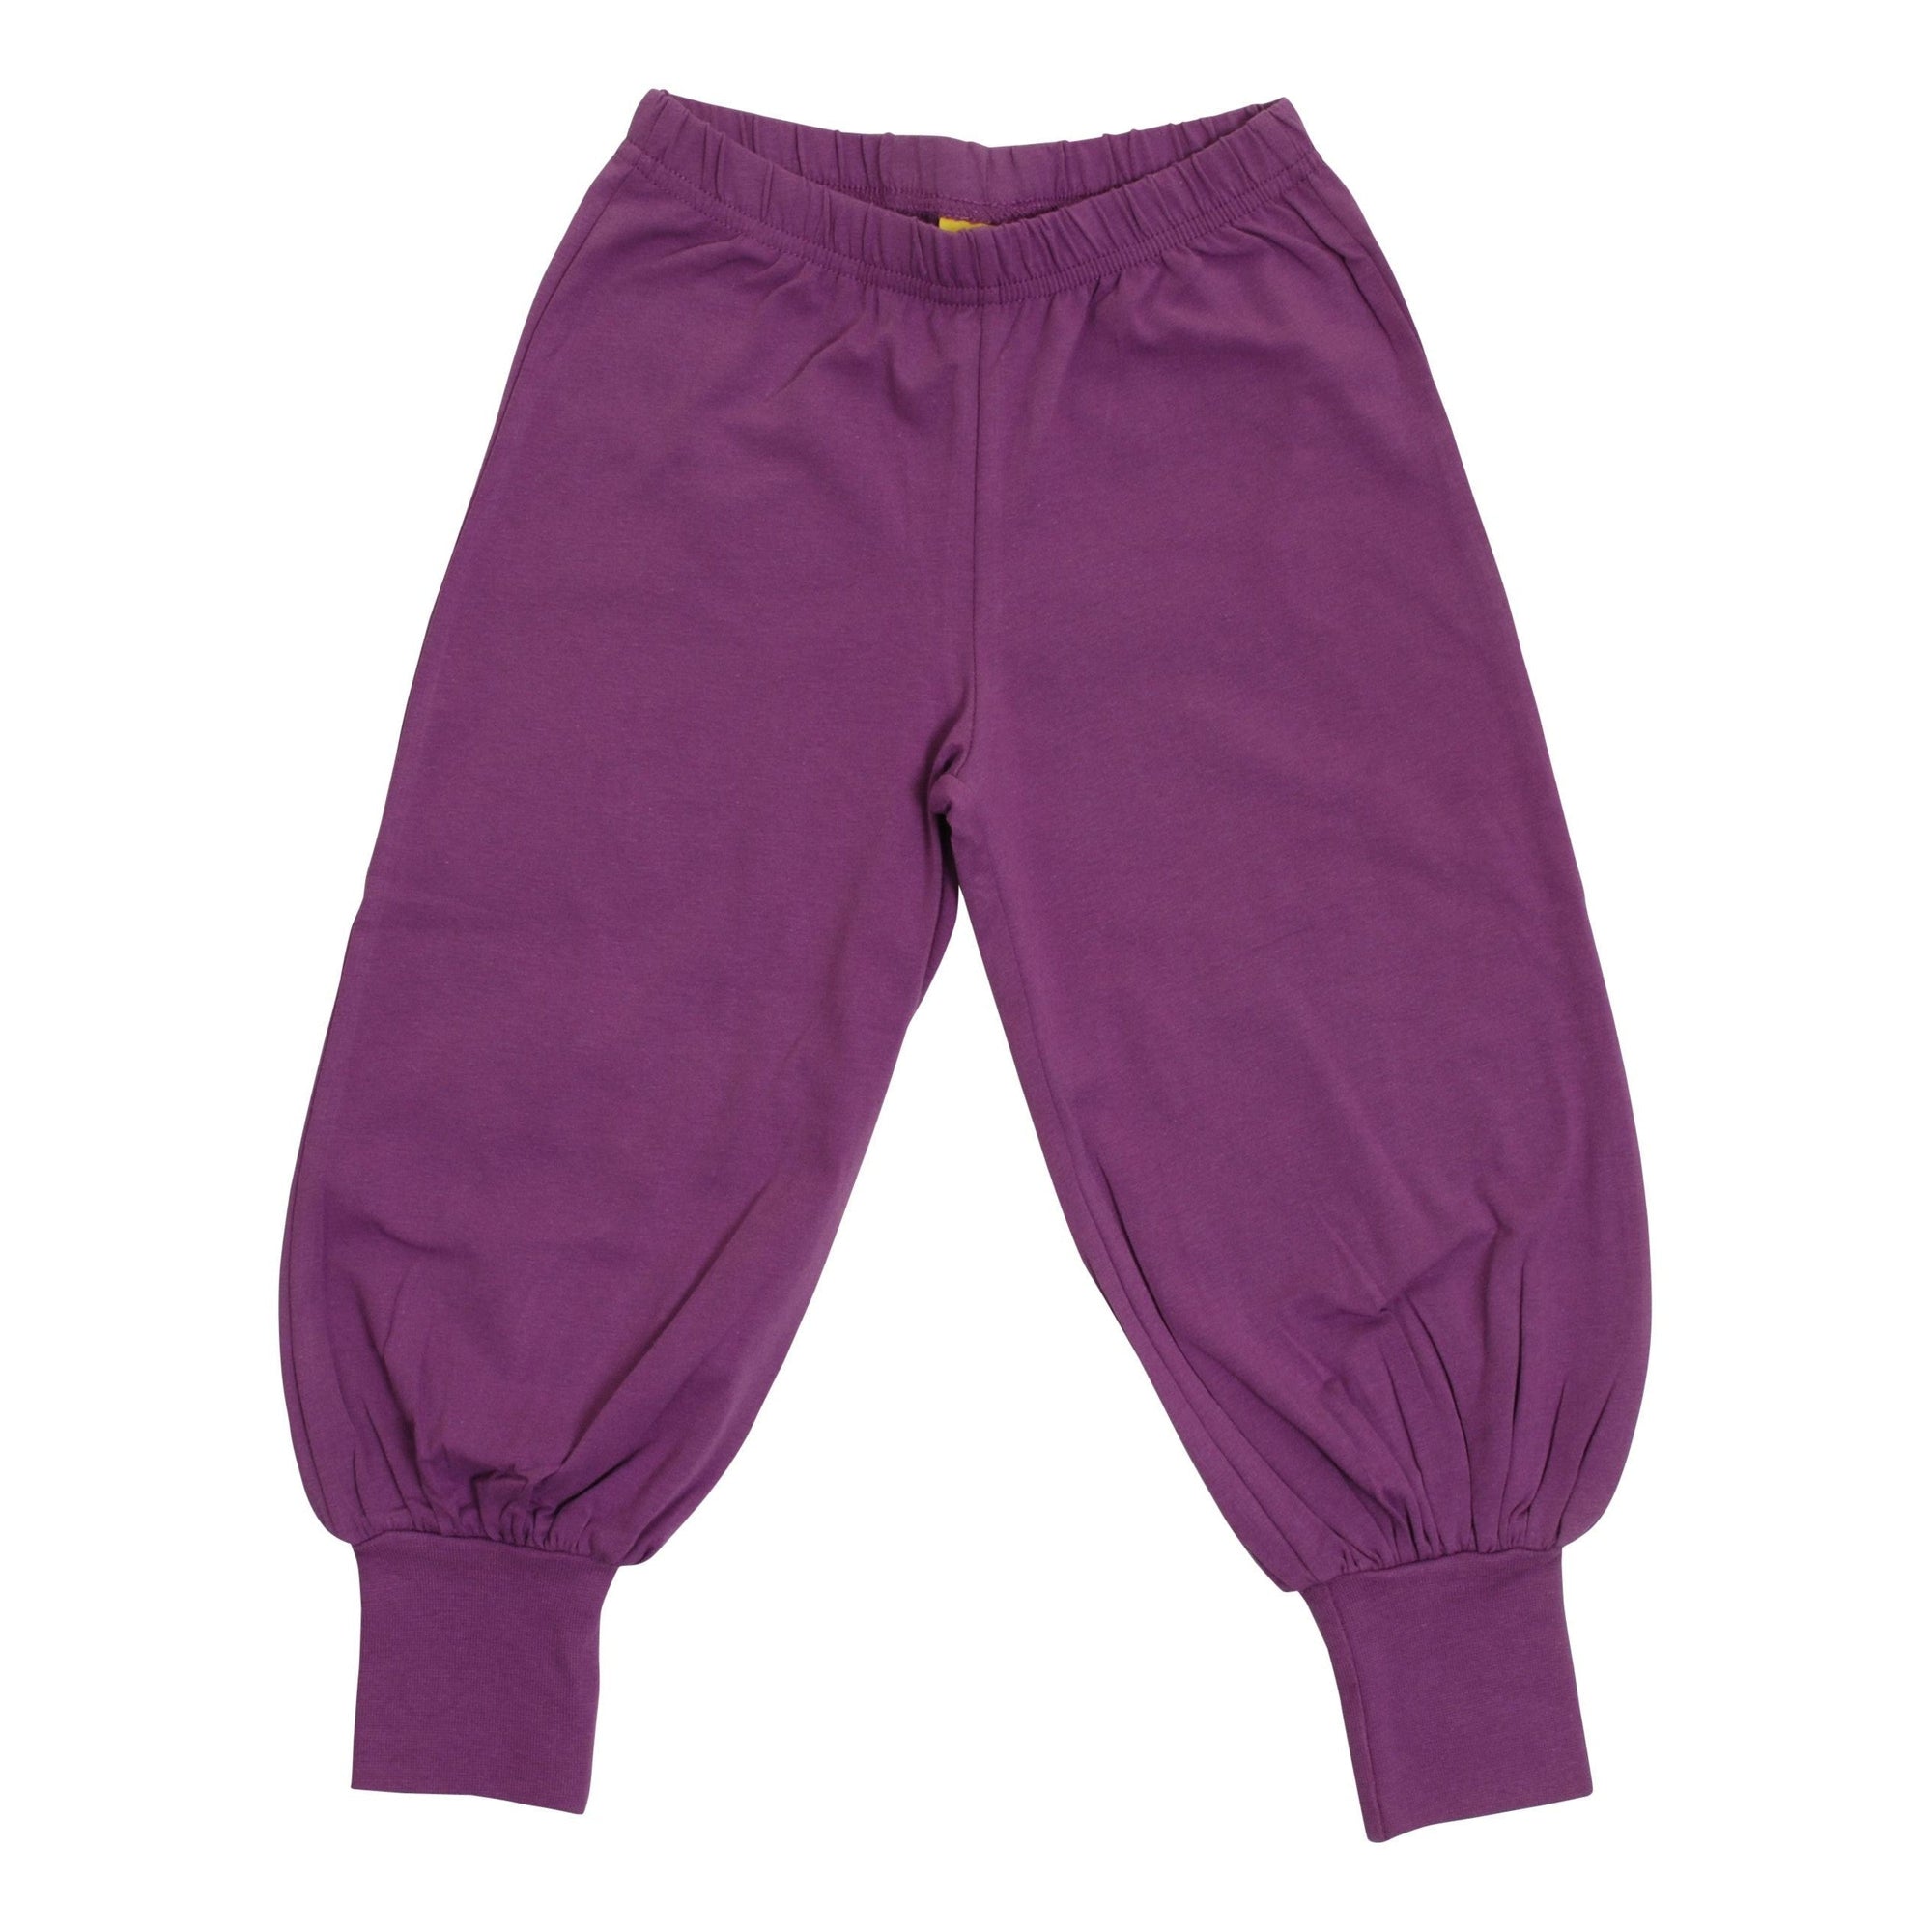 Amethyst Orchid Baggy Pants - 2 Left Size 10-12 & 12-14 years-More Than A Fling-Modern Rascals